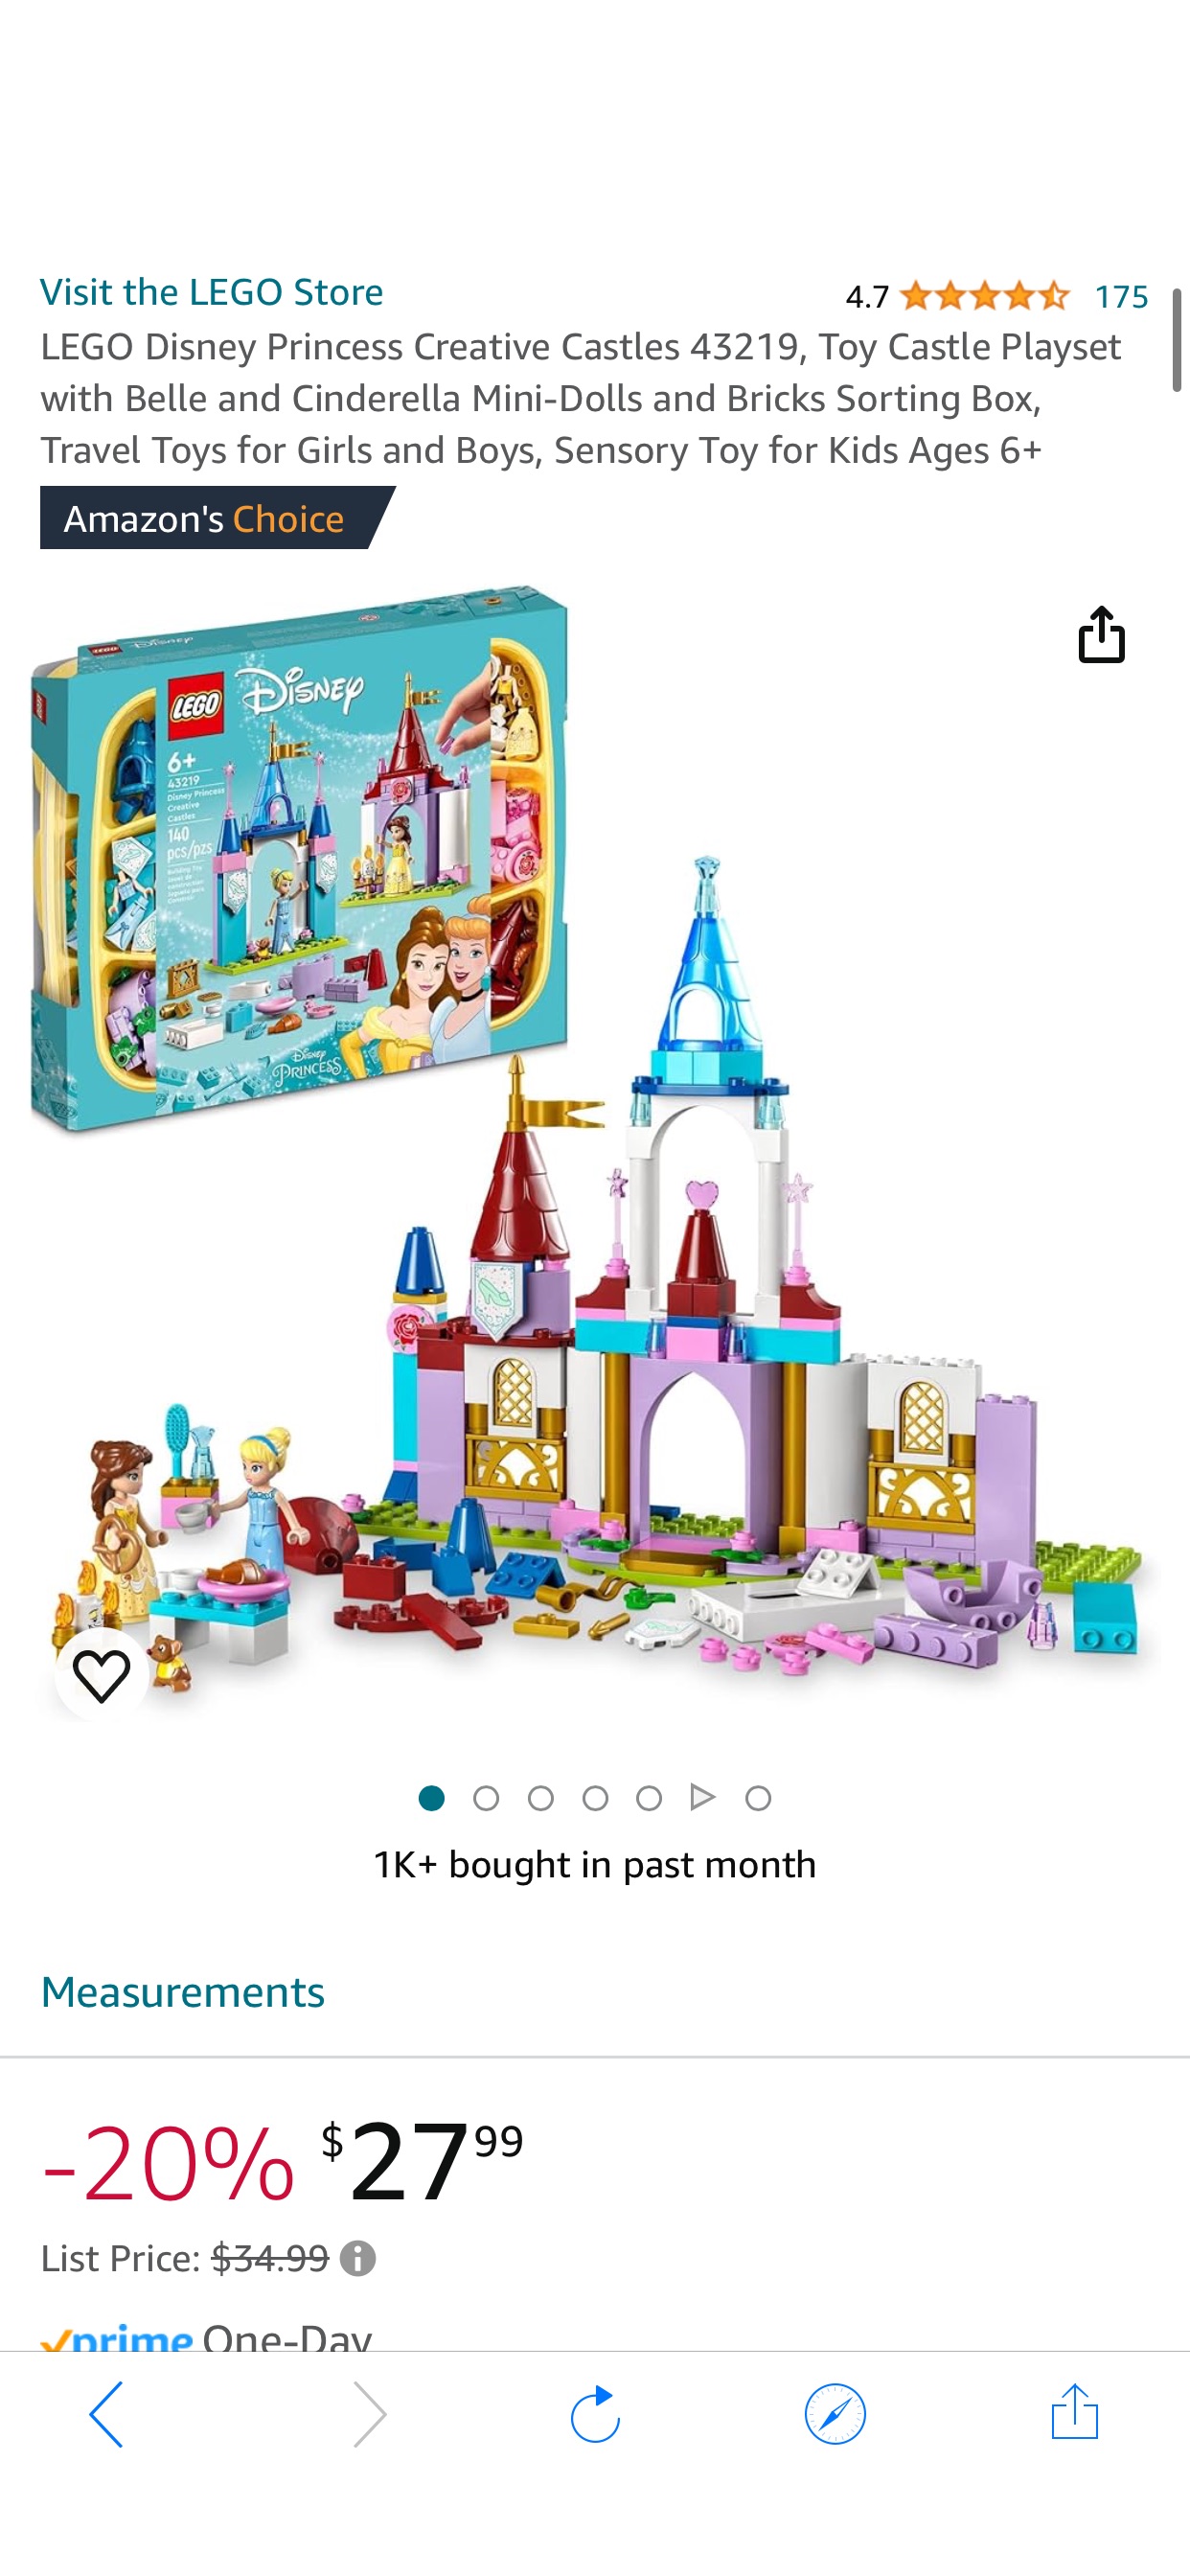 Amazon.com: LEGO Disney Princess Creative Castles 43219​, Toy Castle Playset with Belle and Cinderella Mini-Dolls and Bricks Sorting Box, Travel Toys for Girls and Boys, Sensory Toy for Kids Ages 6+ :